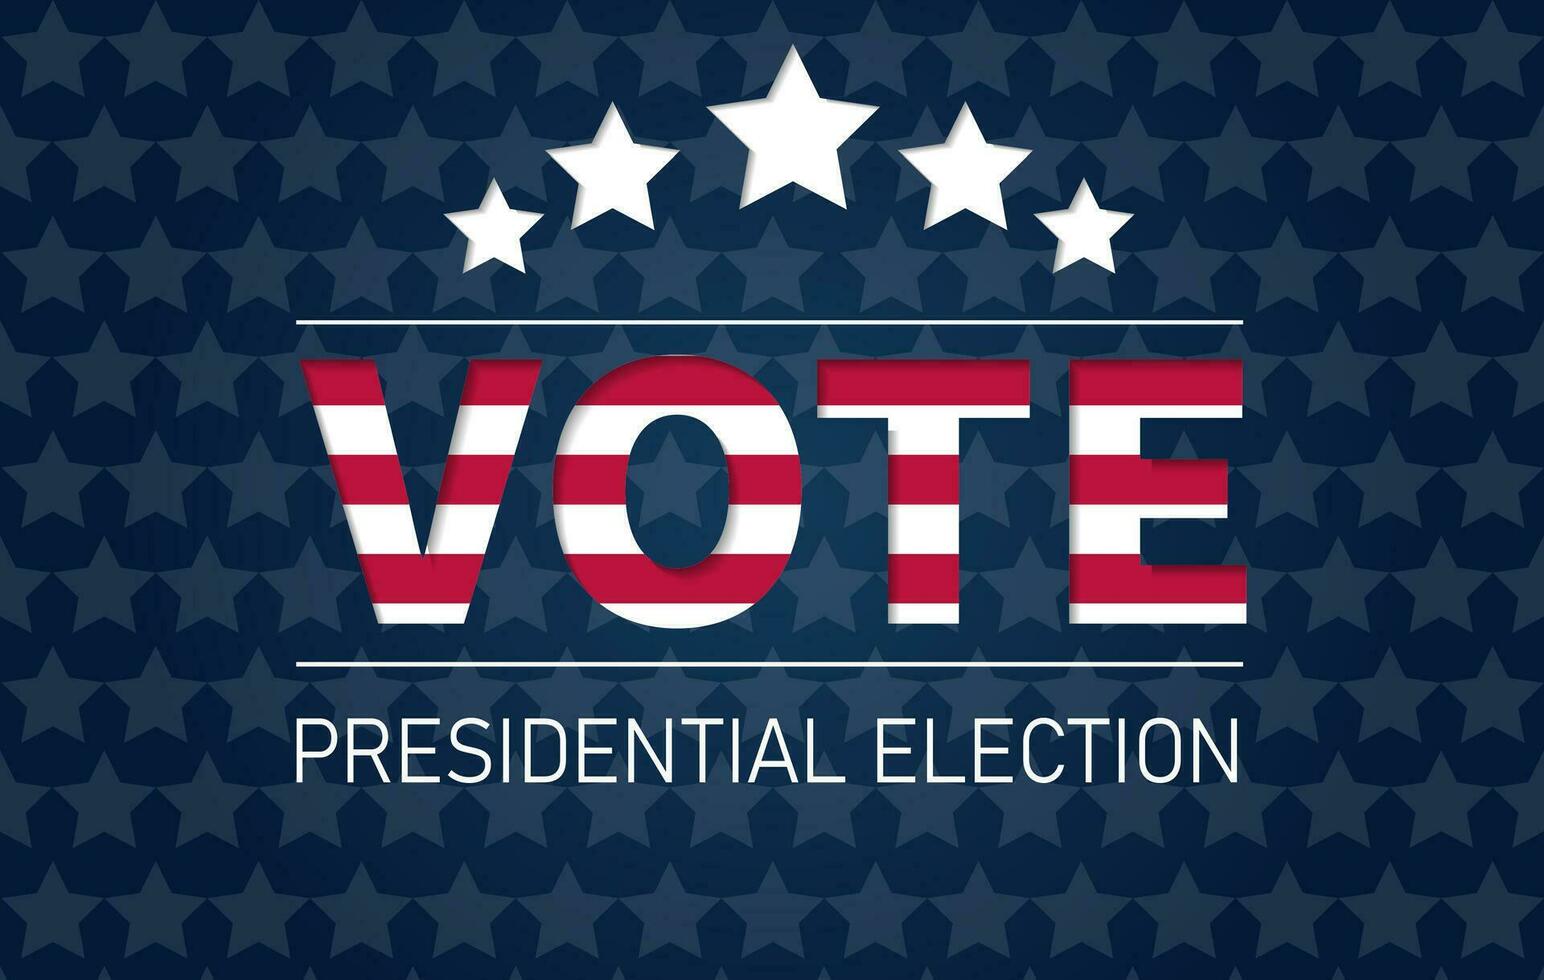 Presidential election in USA. Voting for president banner in paper cut style vector